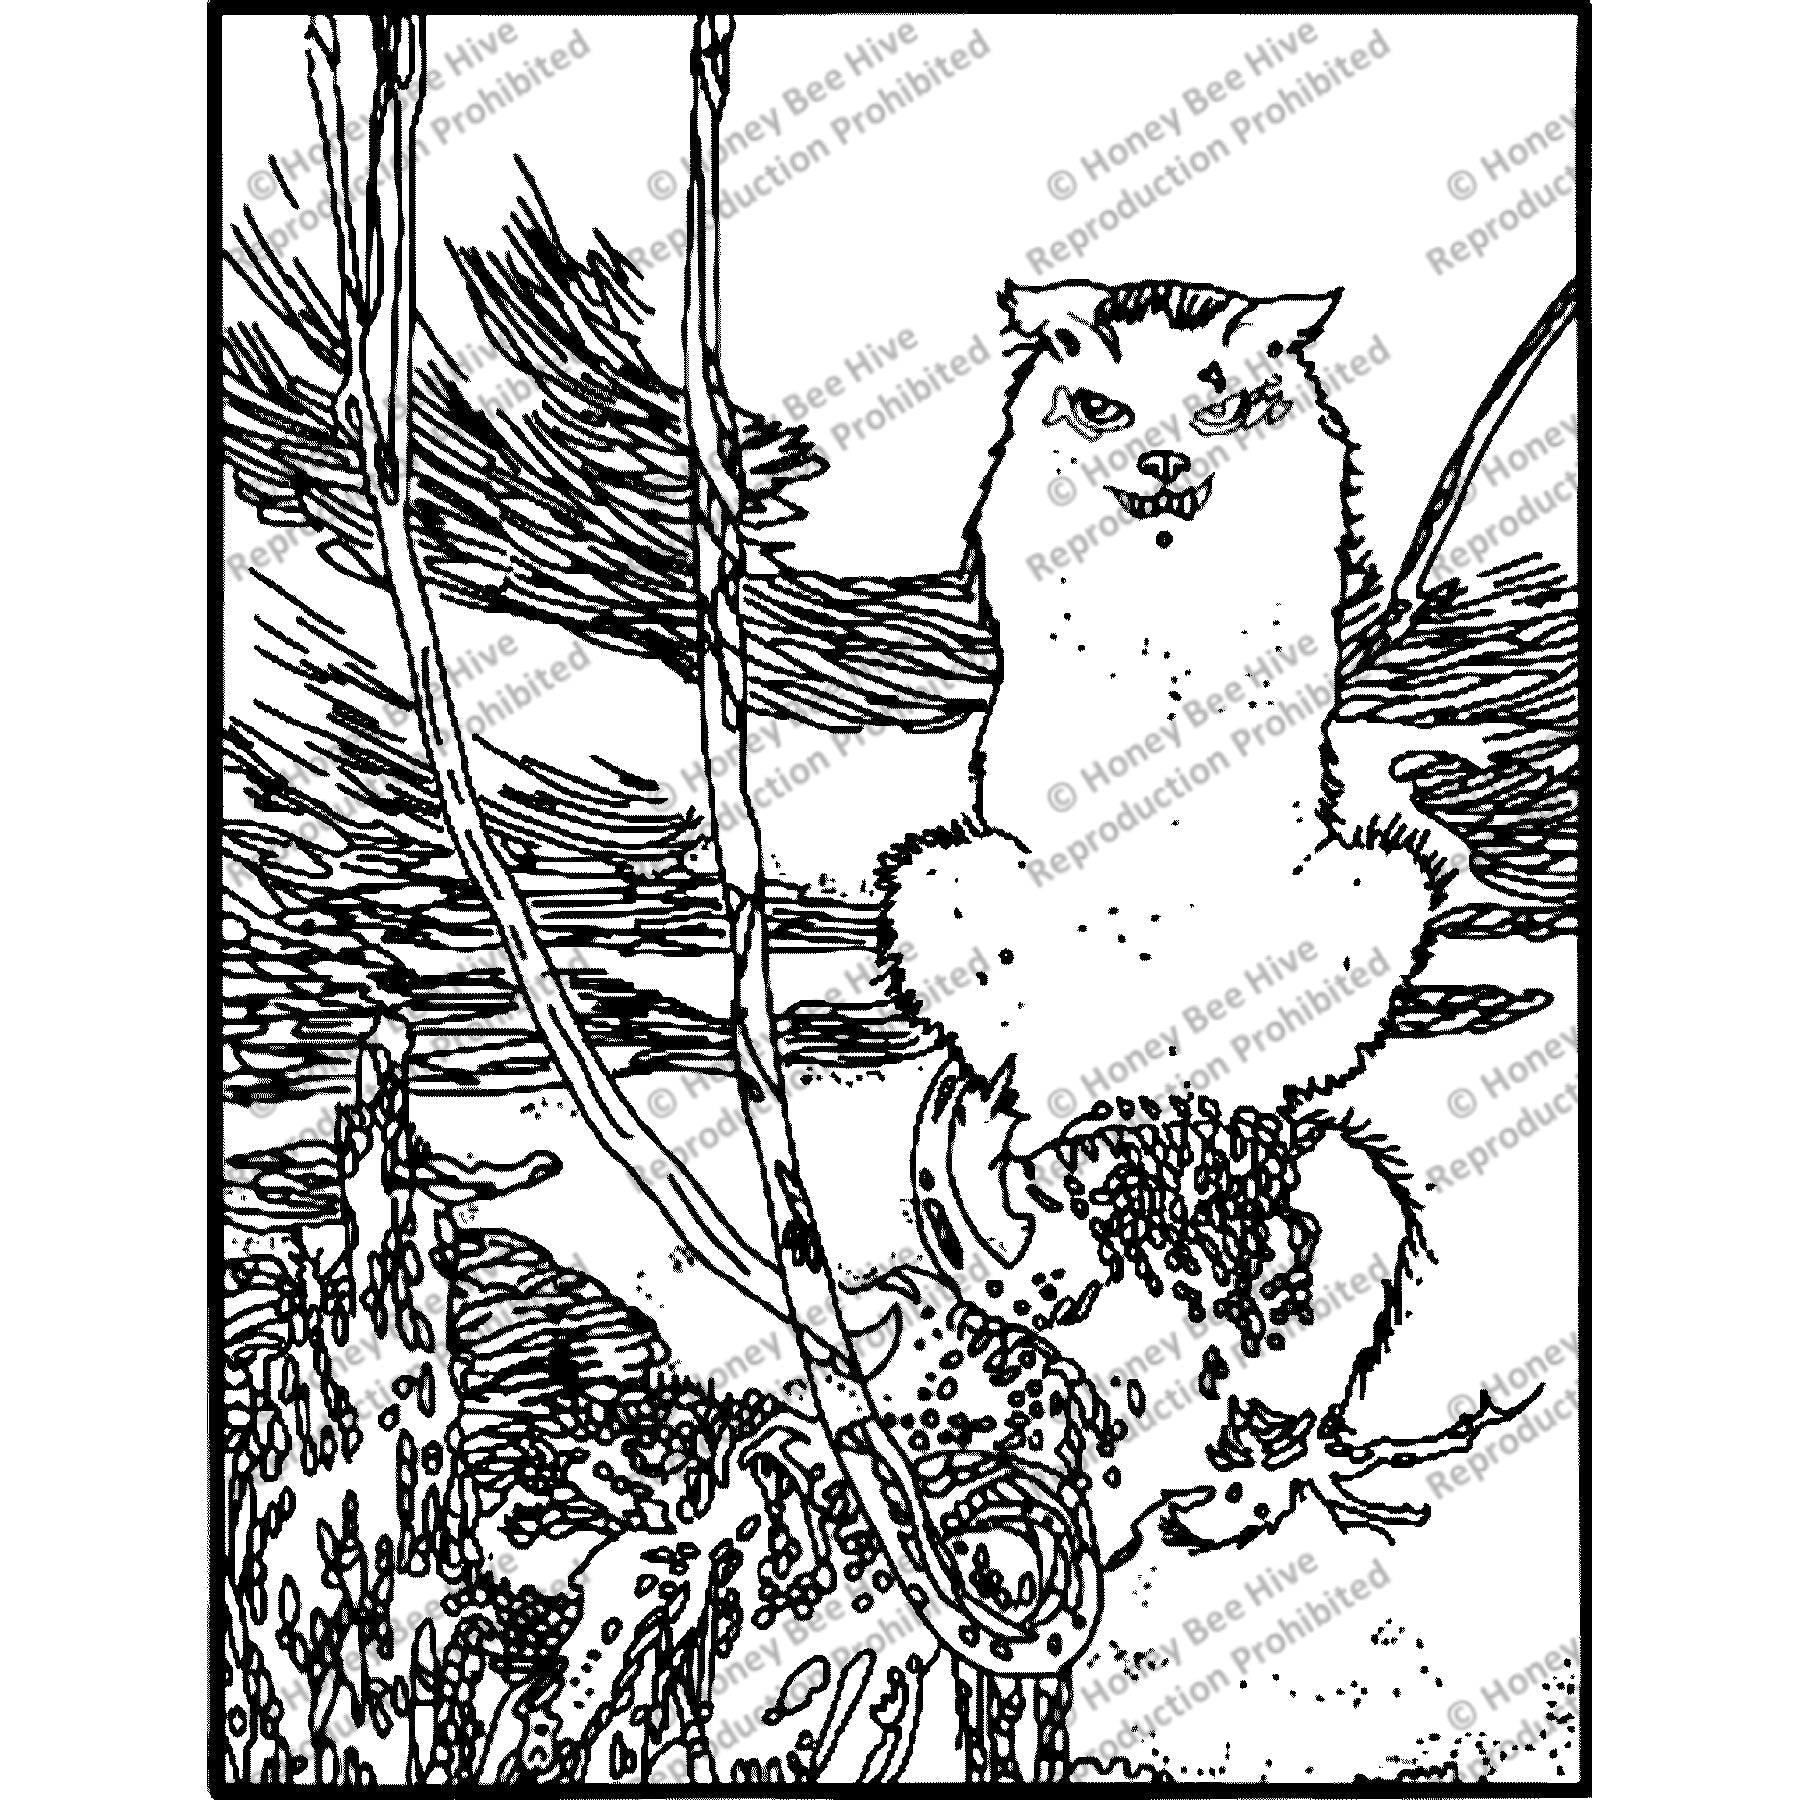 By day the witch would become a cat, ill. Arthur Rackham, 1909, rug hooking pattern